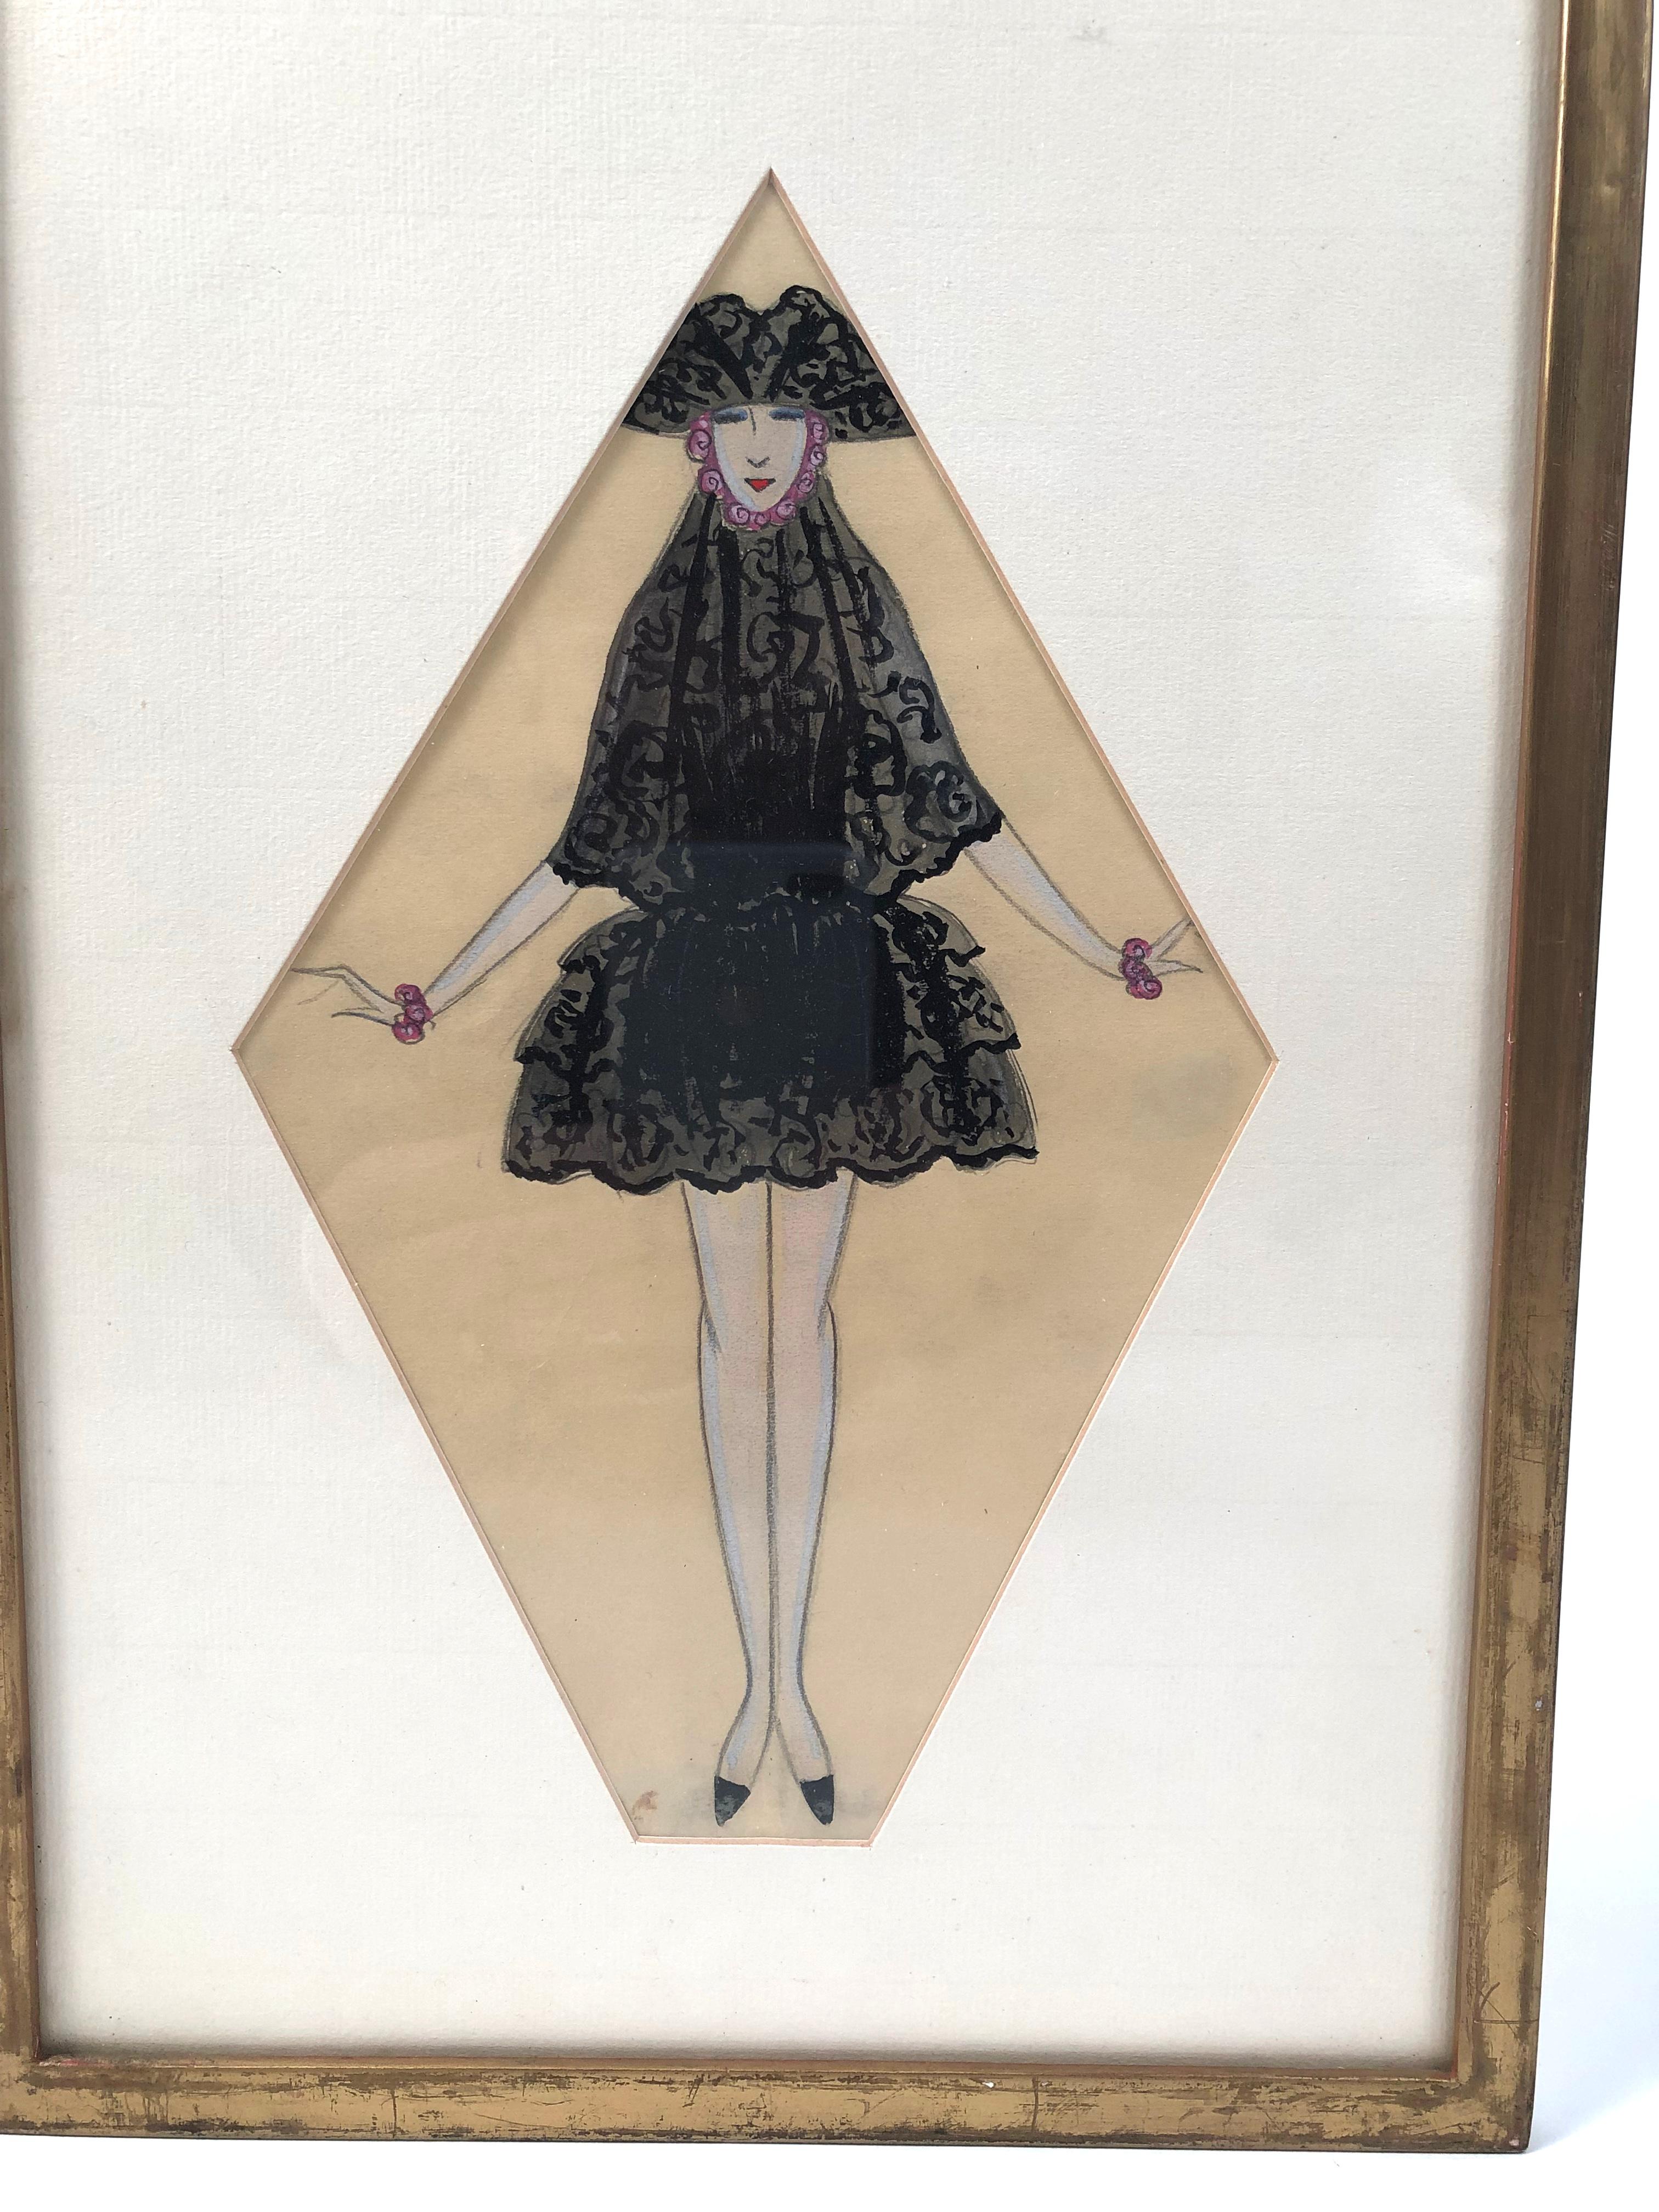 An Art Deco period fashion or costume drawing of a woman in a Venetian black lace dress and hat, with arms extended, showing off her pink purple large beaded bracelets. The hat is reminiscent of men's tricorner hats worn in the 18th century and the